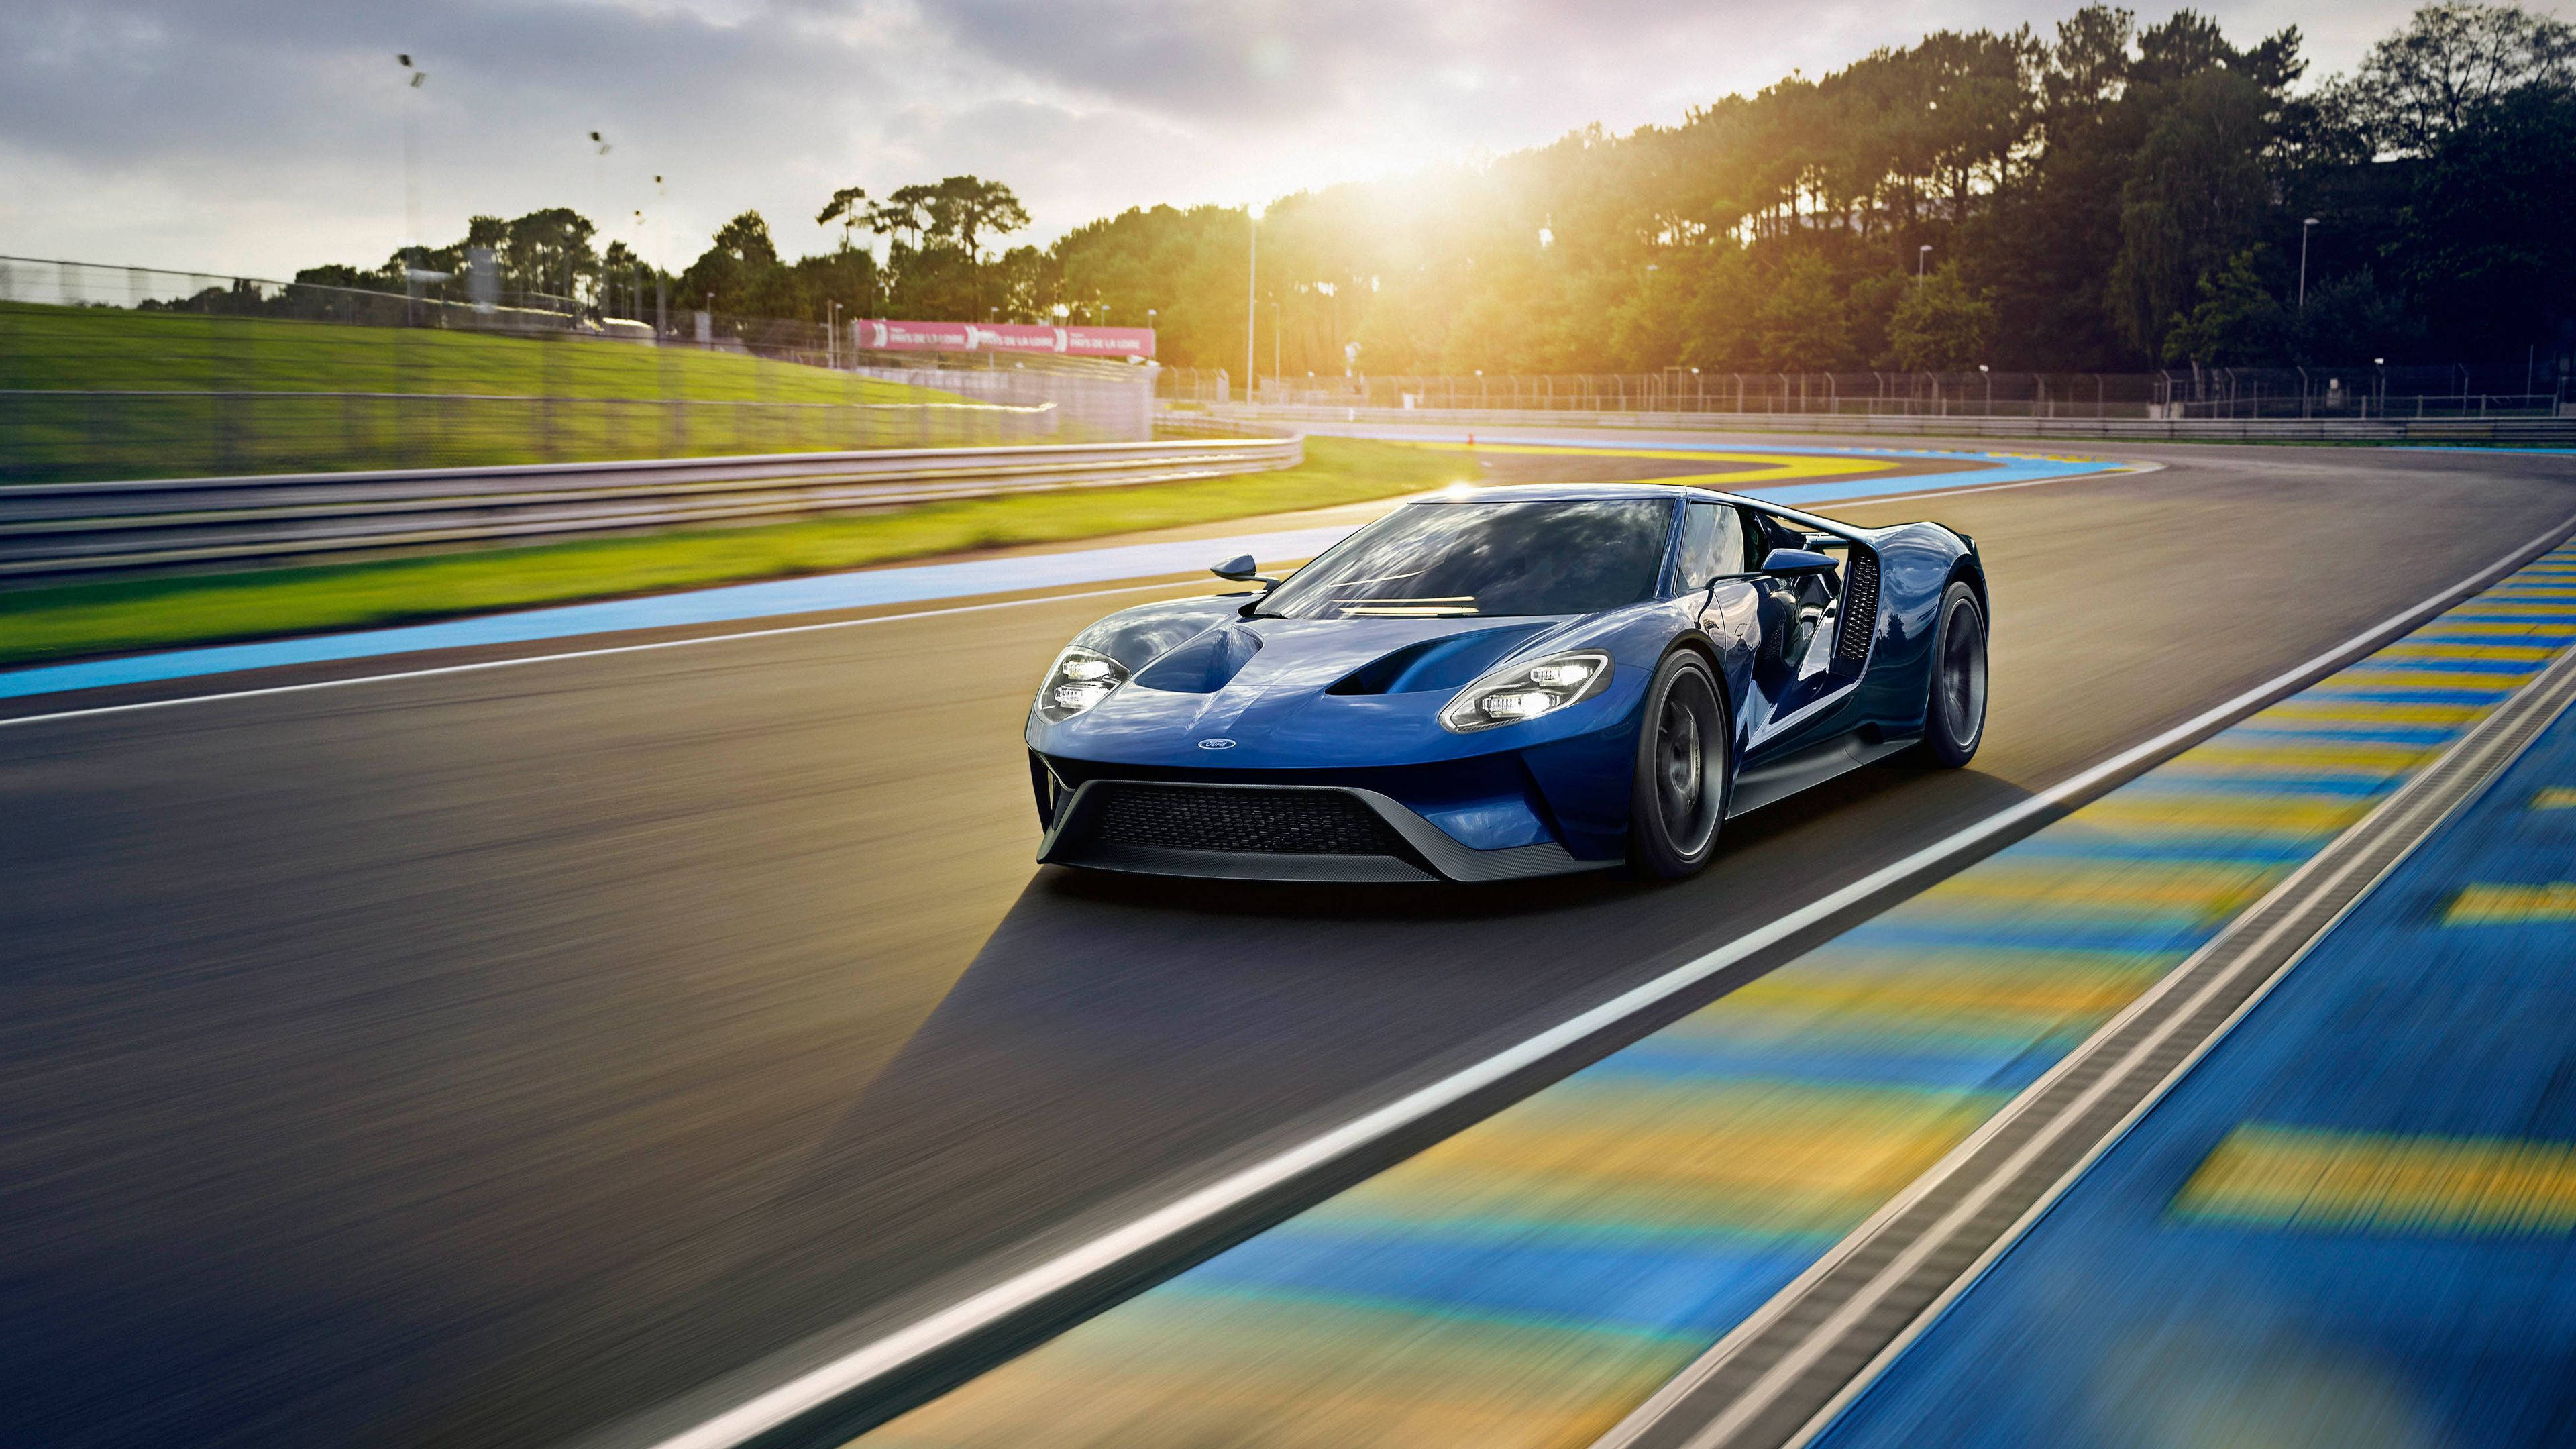 Top 999+ Ford Gt Wallpapers Full HD, 4K✅Free to Use